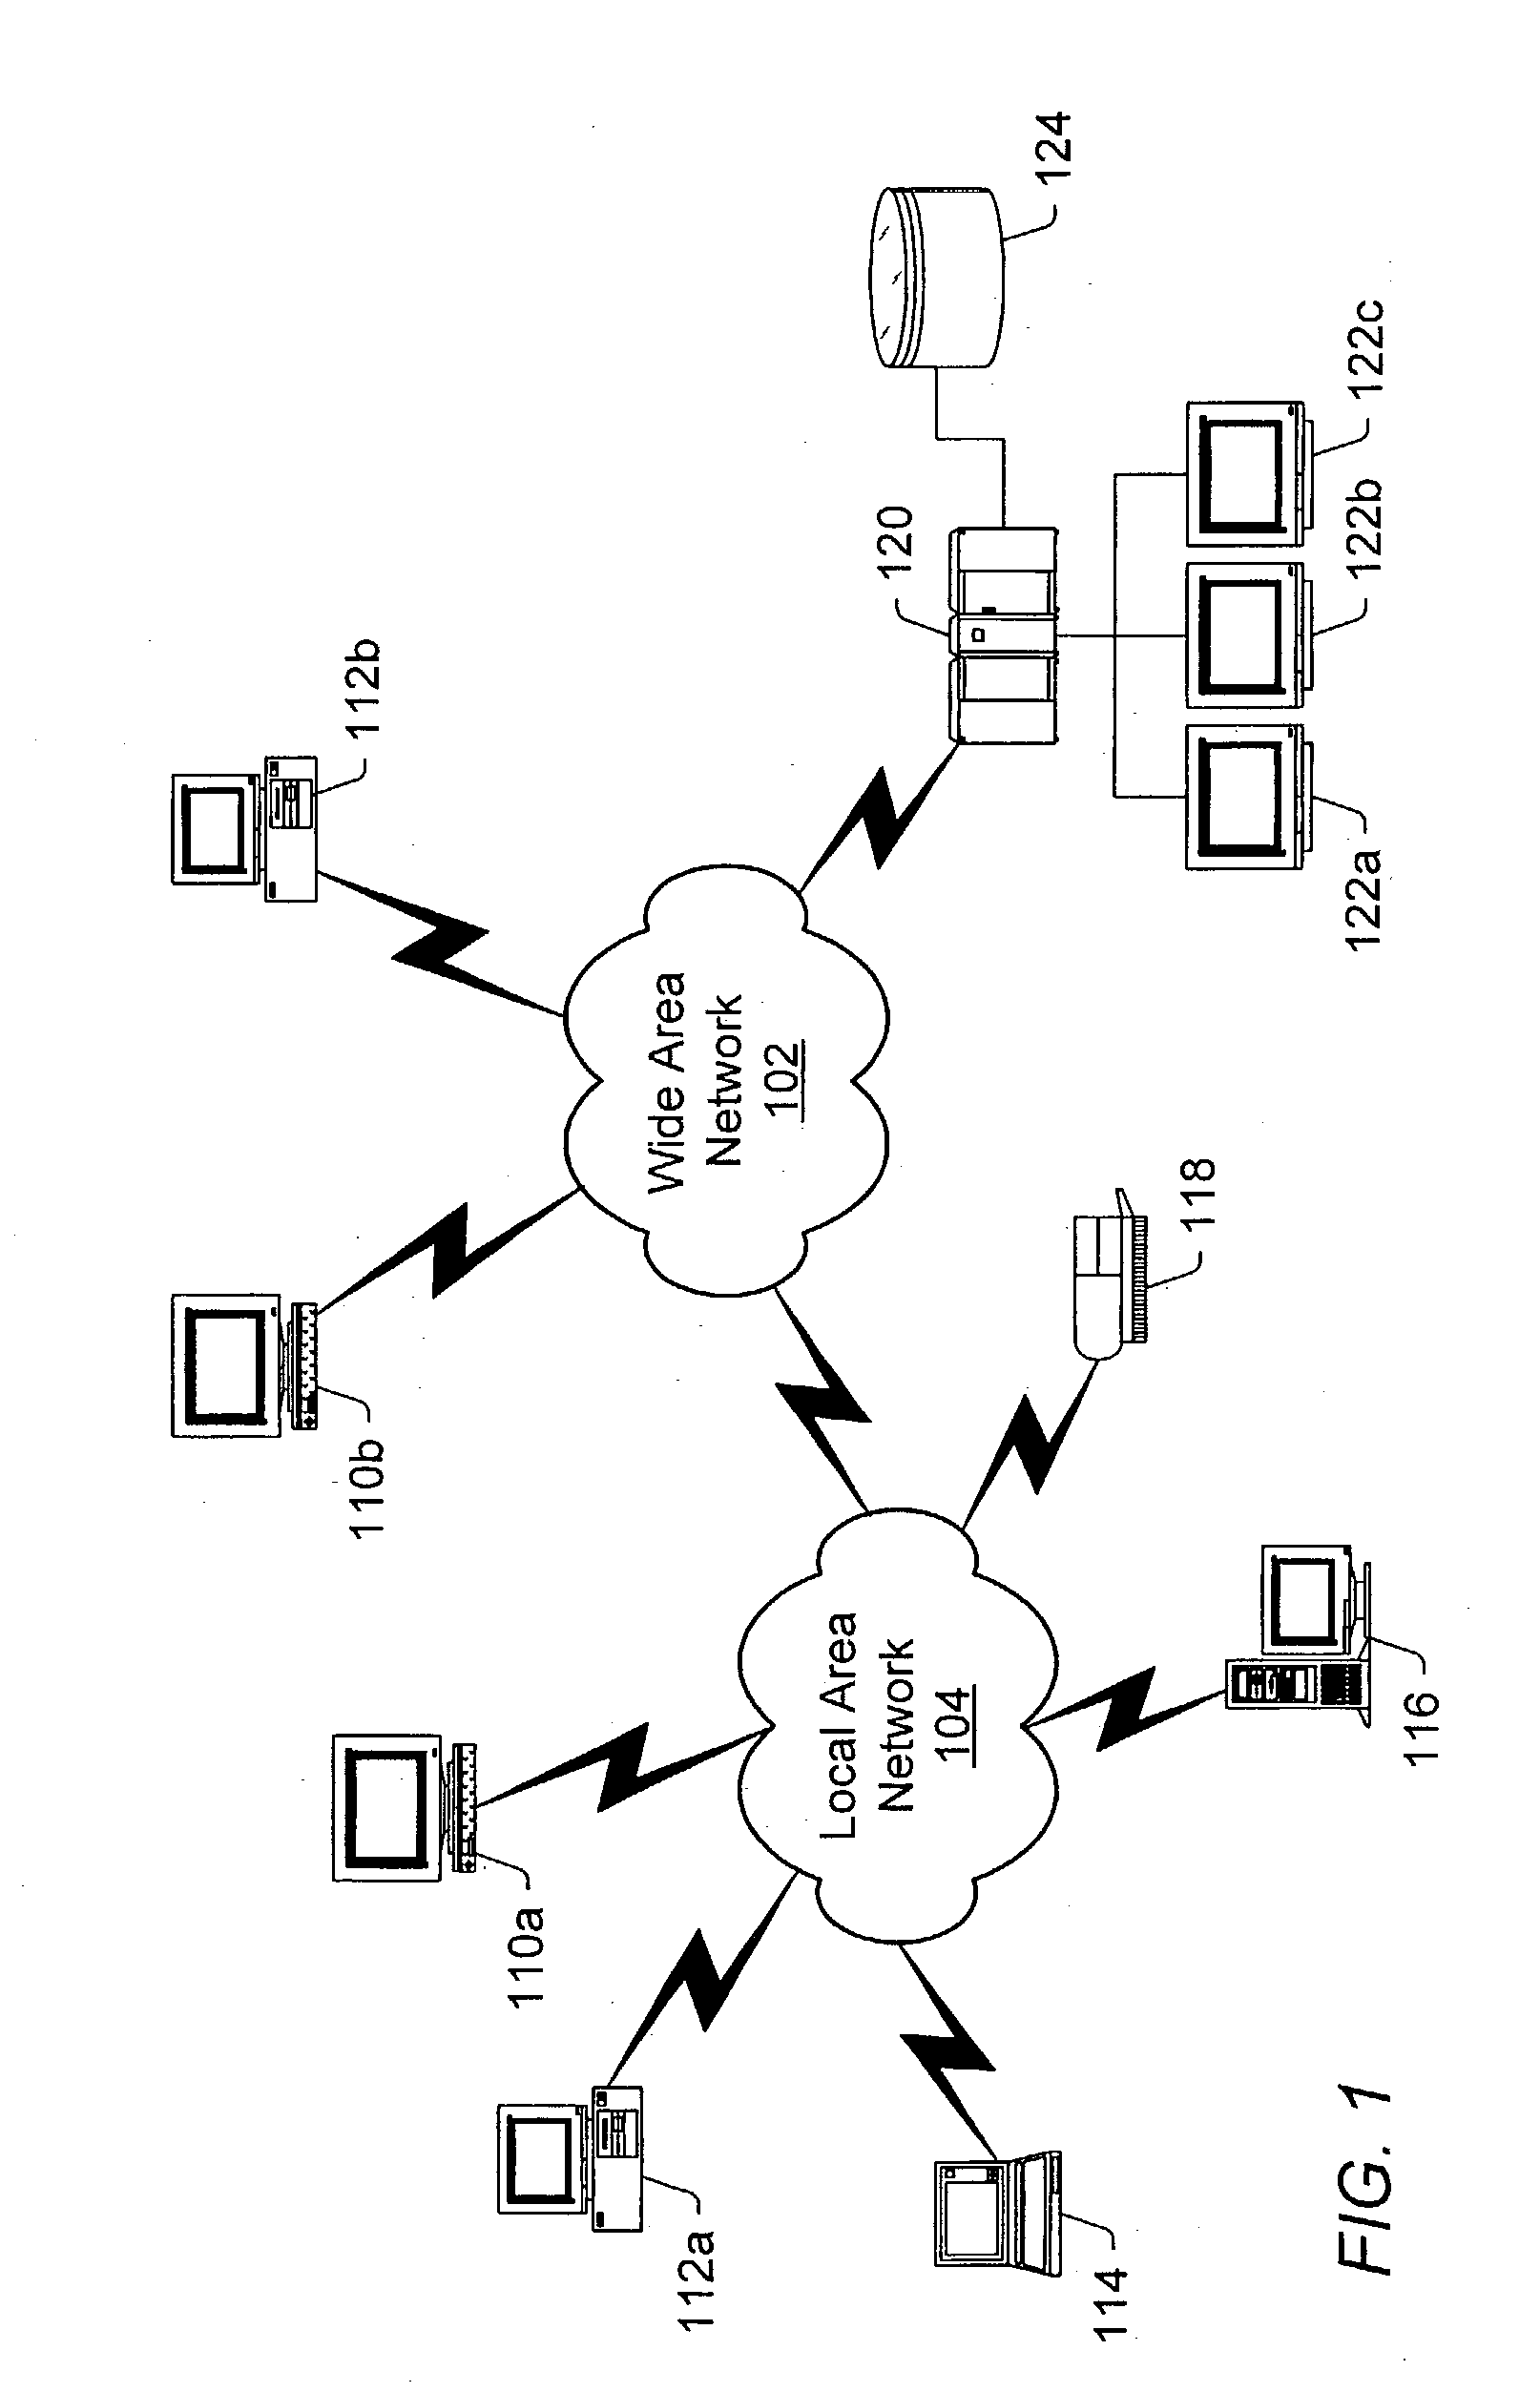 Computerized method and system for estimating liability using recorded vehicle data